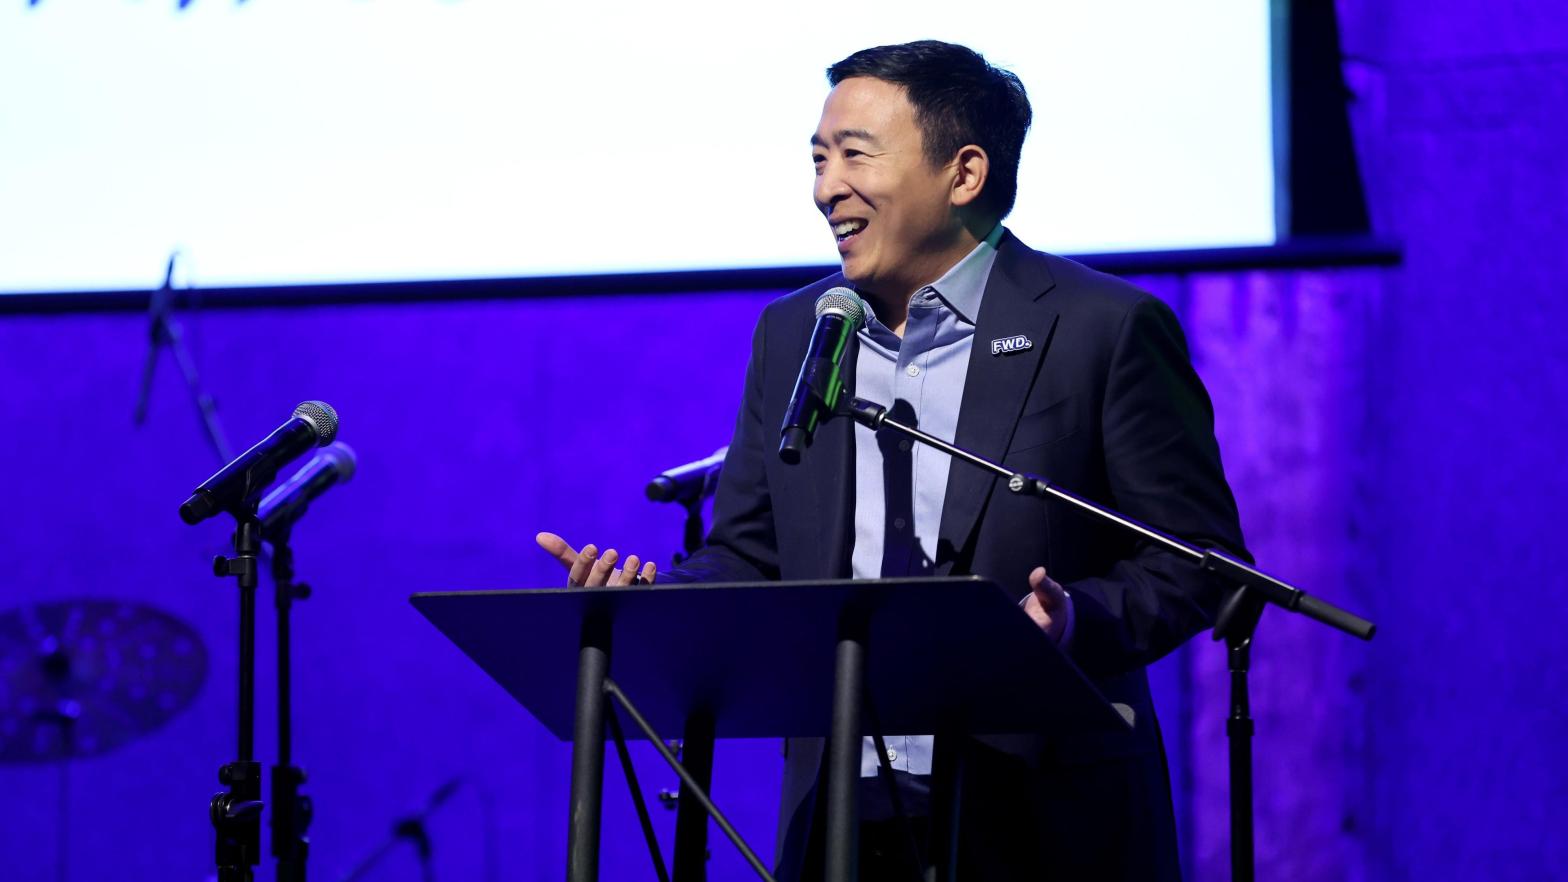 Andrew Yang took an interesting lesson from his string political losses and has now pivoted full-force into Web3 companies. (Photo: Monica Schipper, Getty Images)